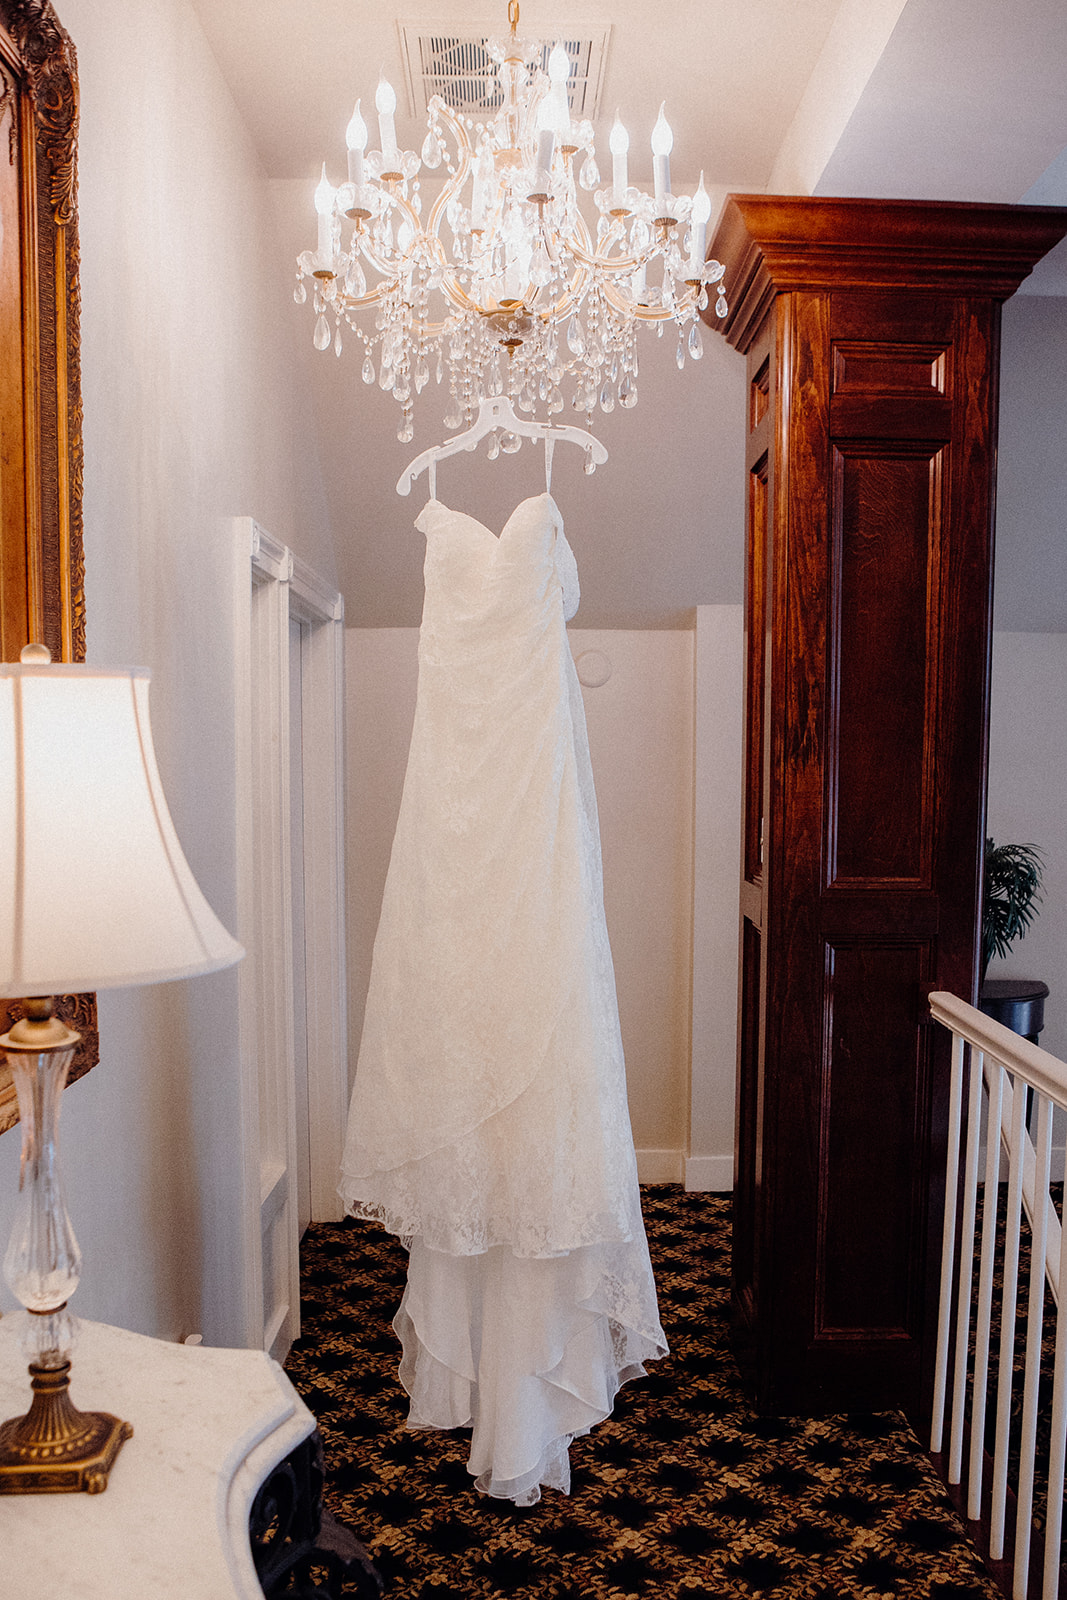 Bridal gown hanging from the chandelier the woodwinds
new haven wedding photographer